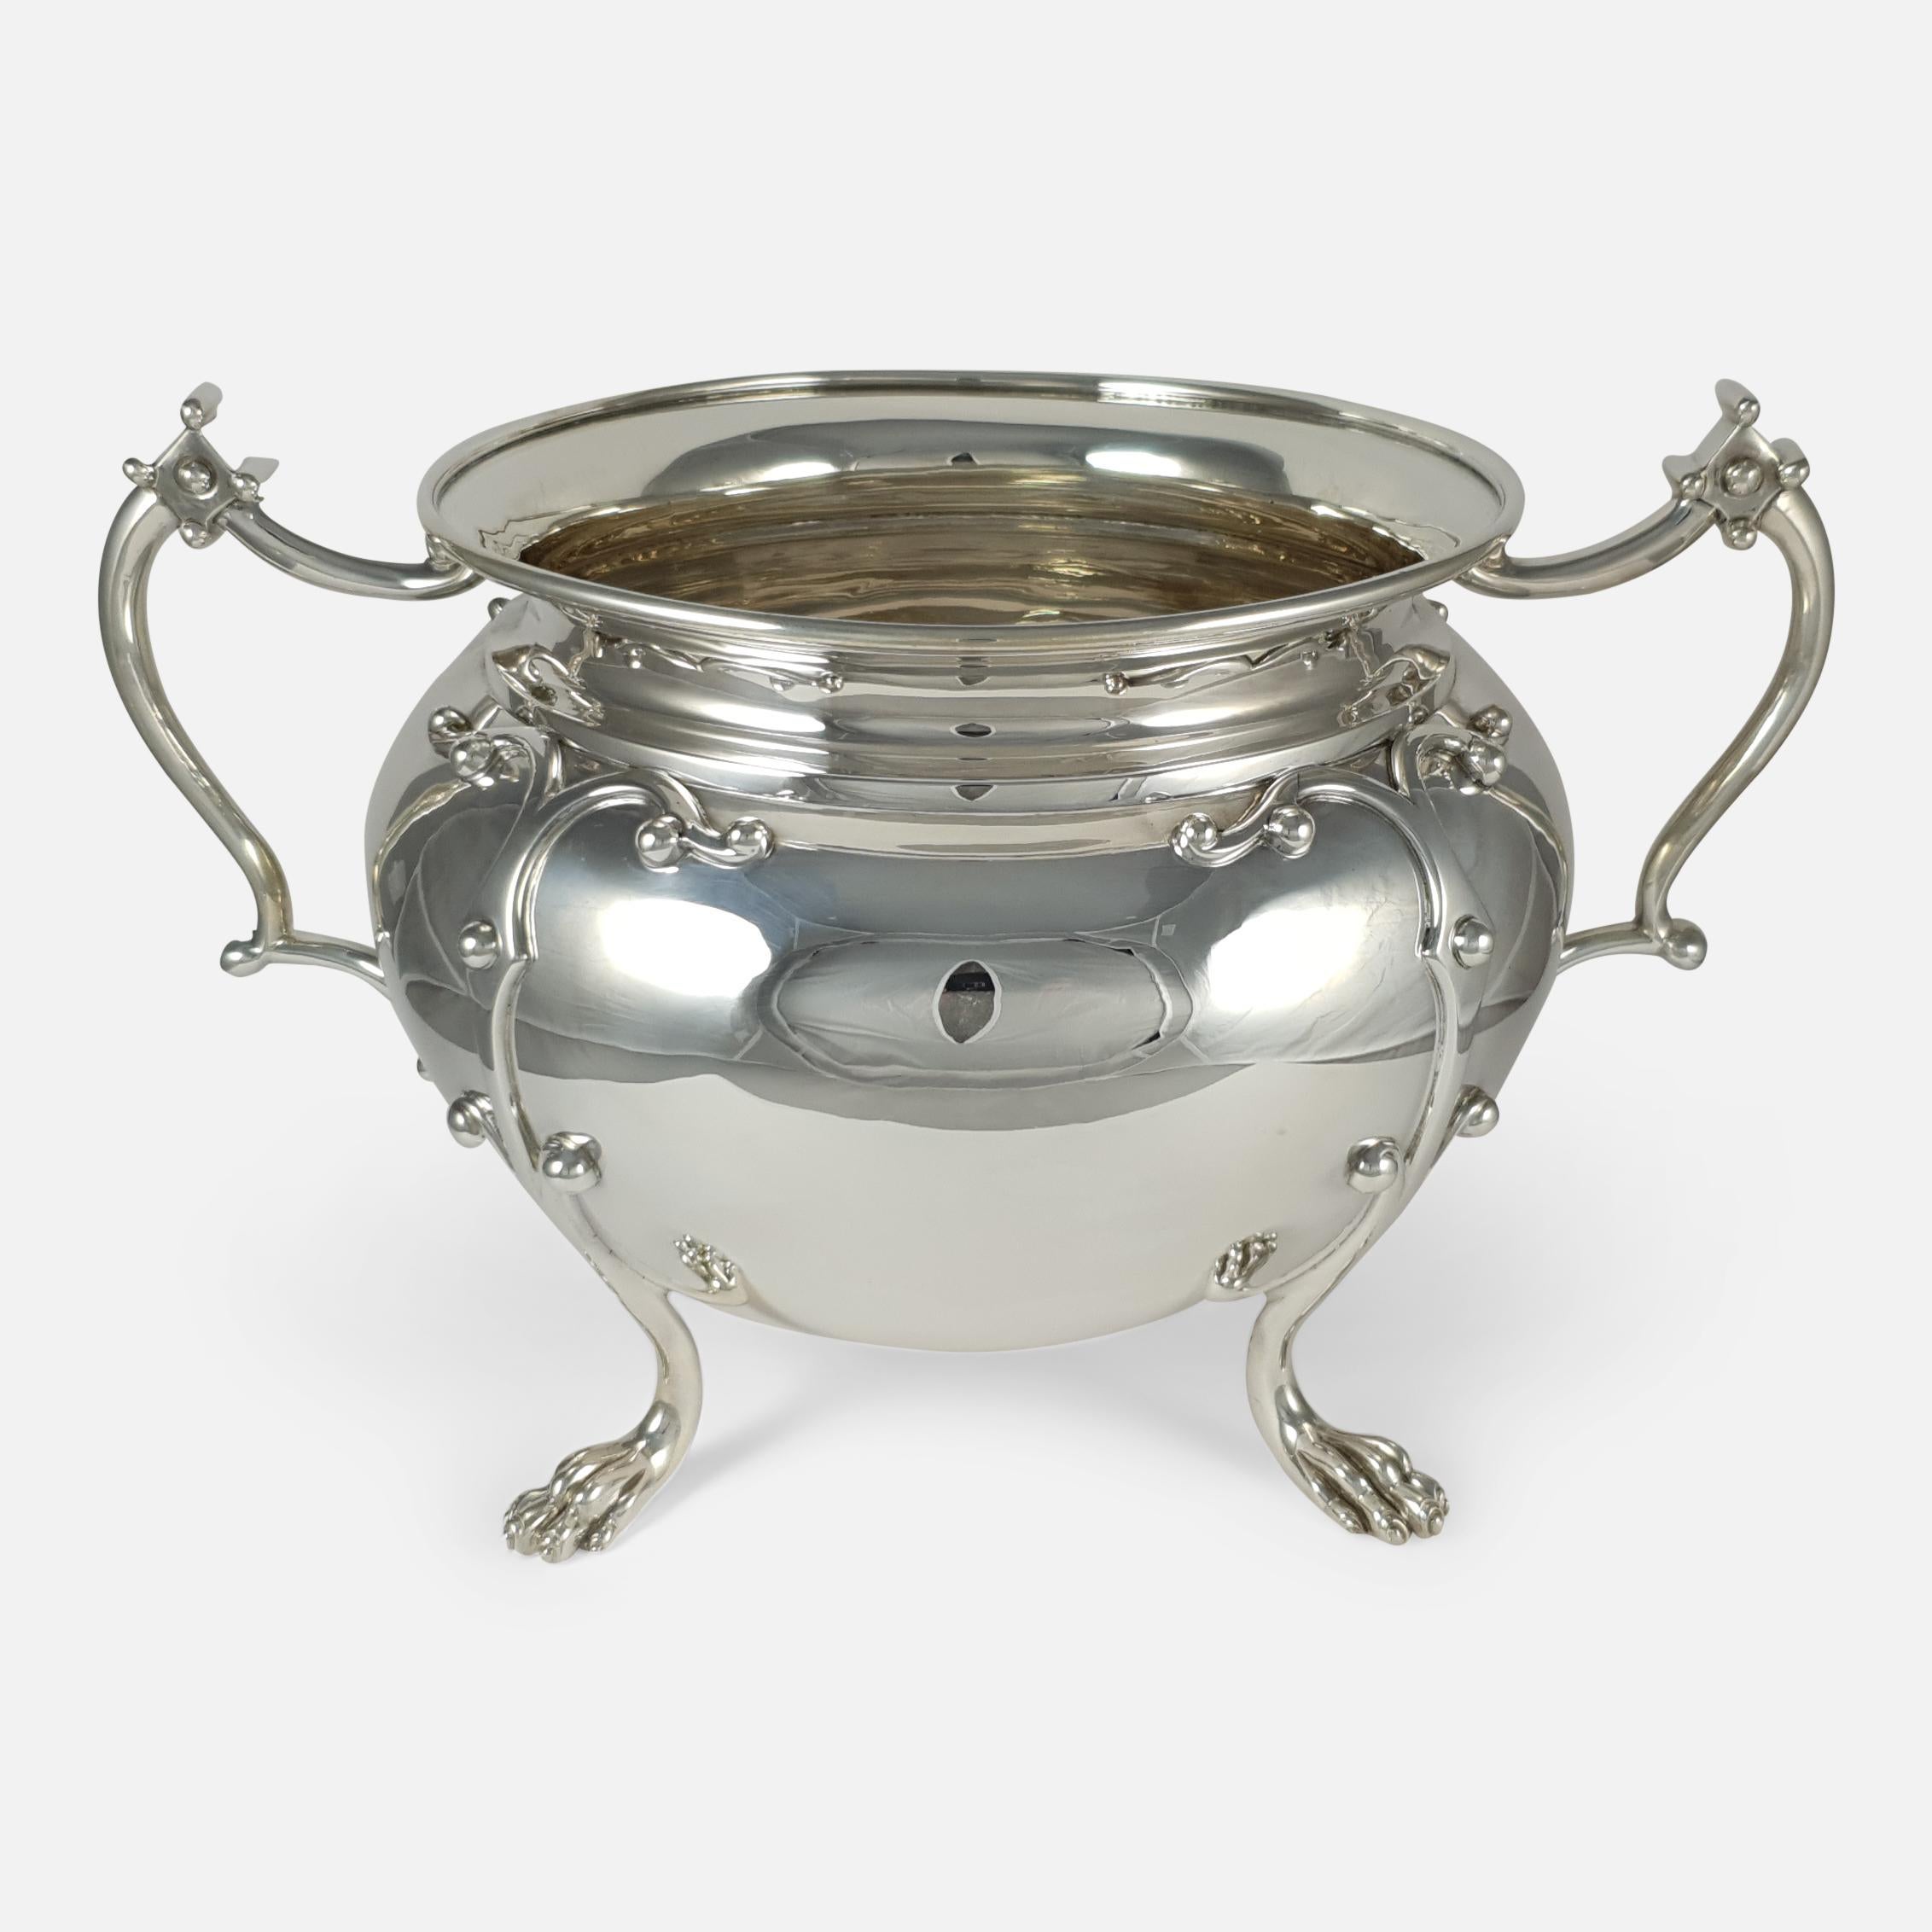 An antique Edwardian sterling silver twin-handled jardinière bowl by James Wakely & Frank Clarke Wheeler, London, 1905. The bowl is of circular rounded form, fitted with two handles, and sitting on four paw feet.

Assay: - .925 (Sterling